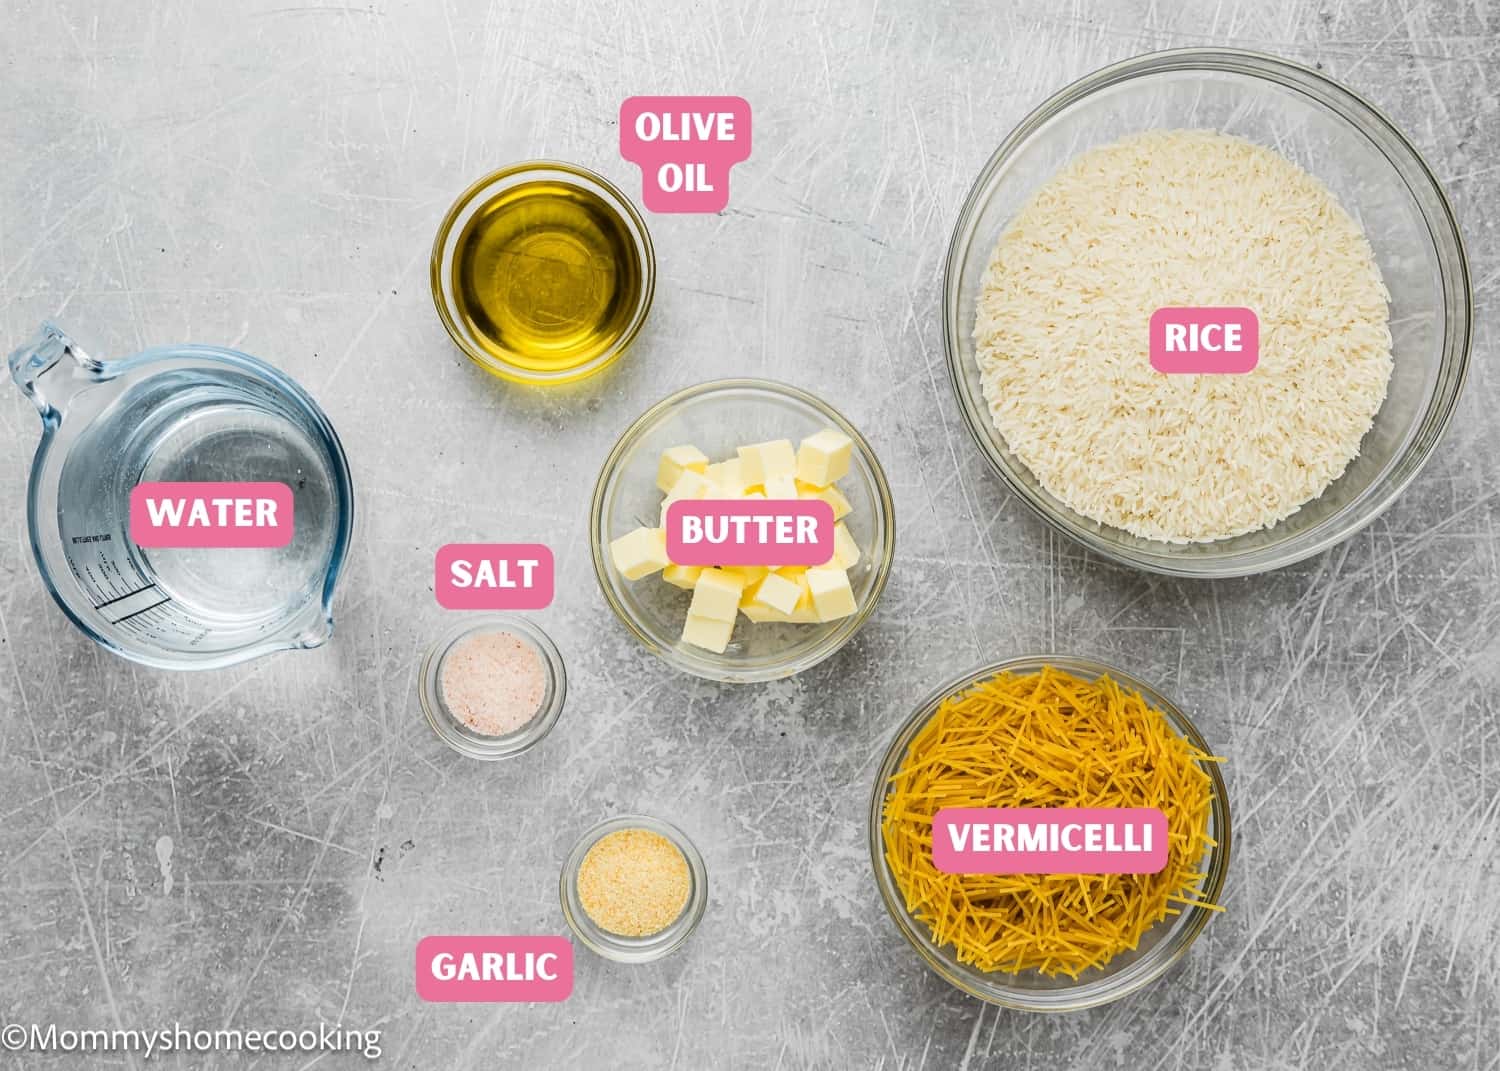 Ingredients needed to make Vermicelli Rice (Arroz con Fideos) with name tags.